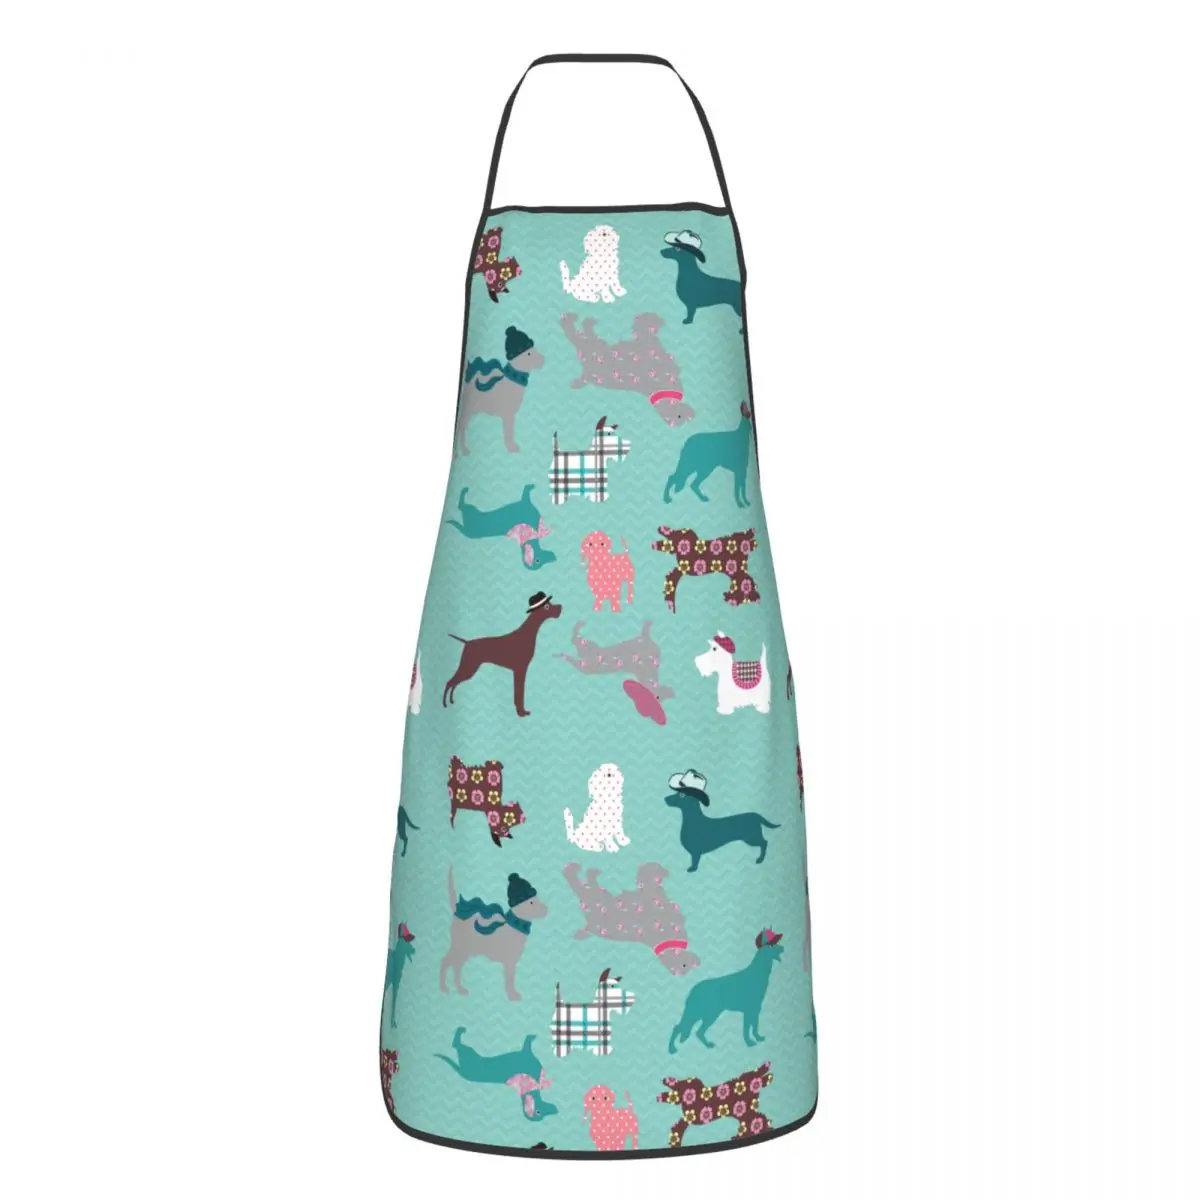 

Dog Cute Green Floral Apron Cuisine Cooking Baking Household Cleaning Gardening Aprons Kitchen Sleeveless Pinafore Adult